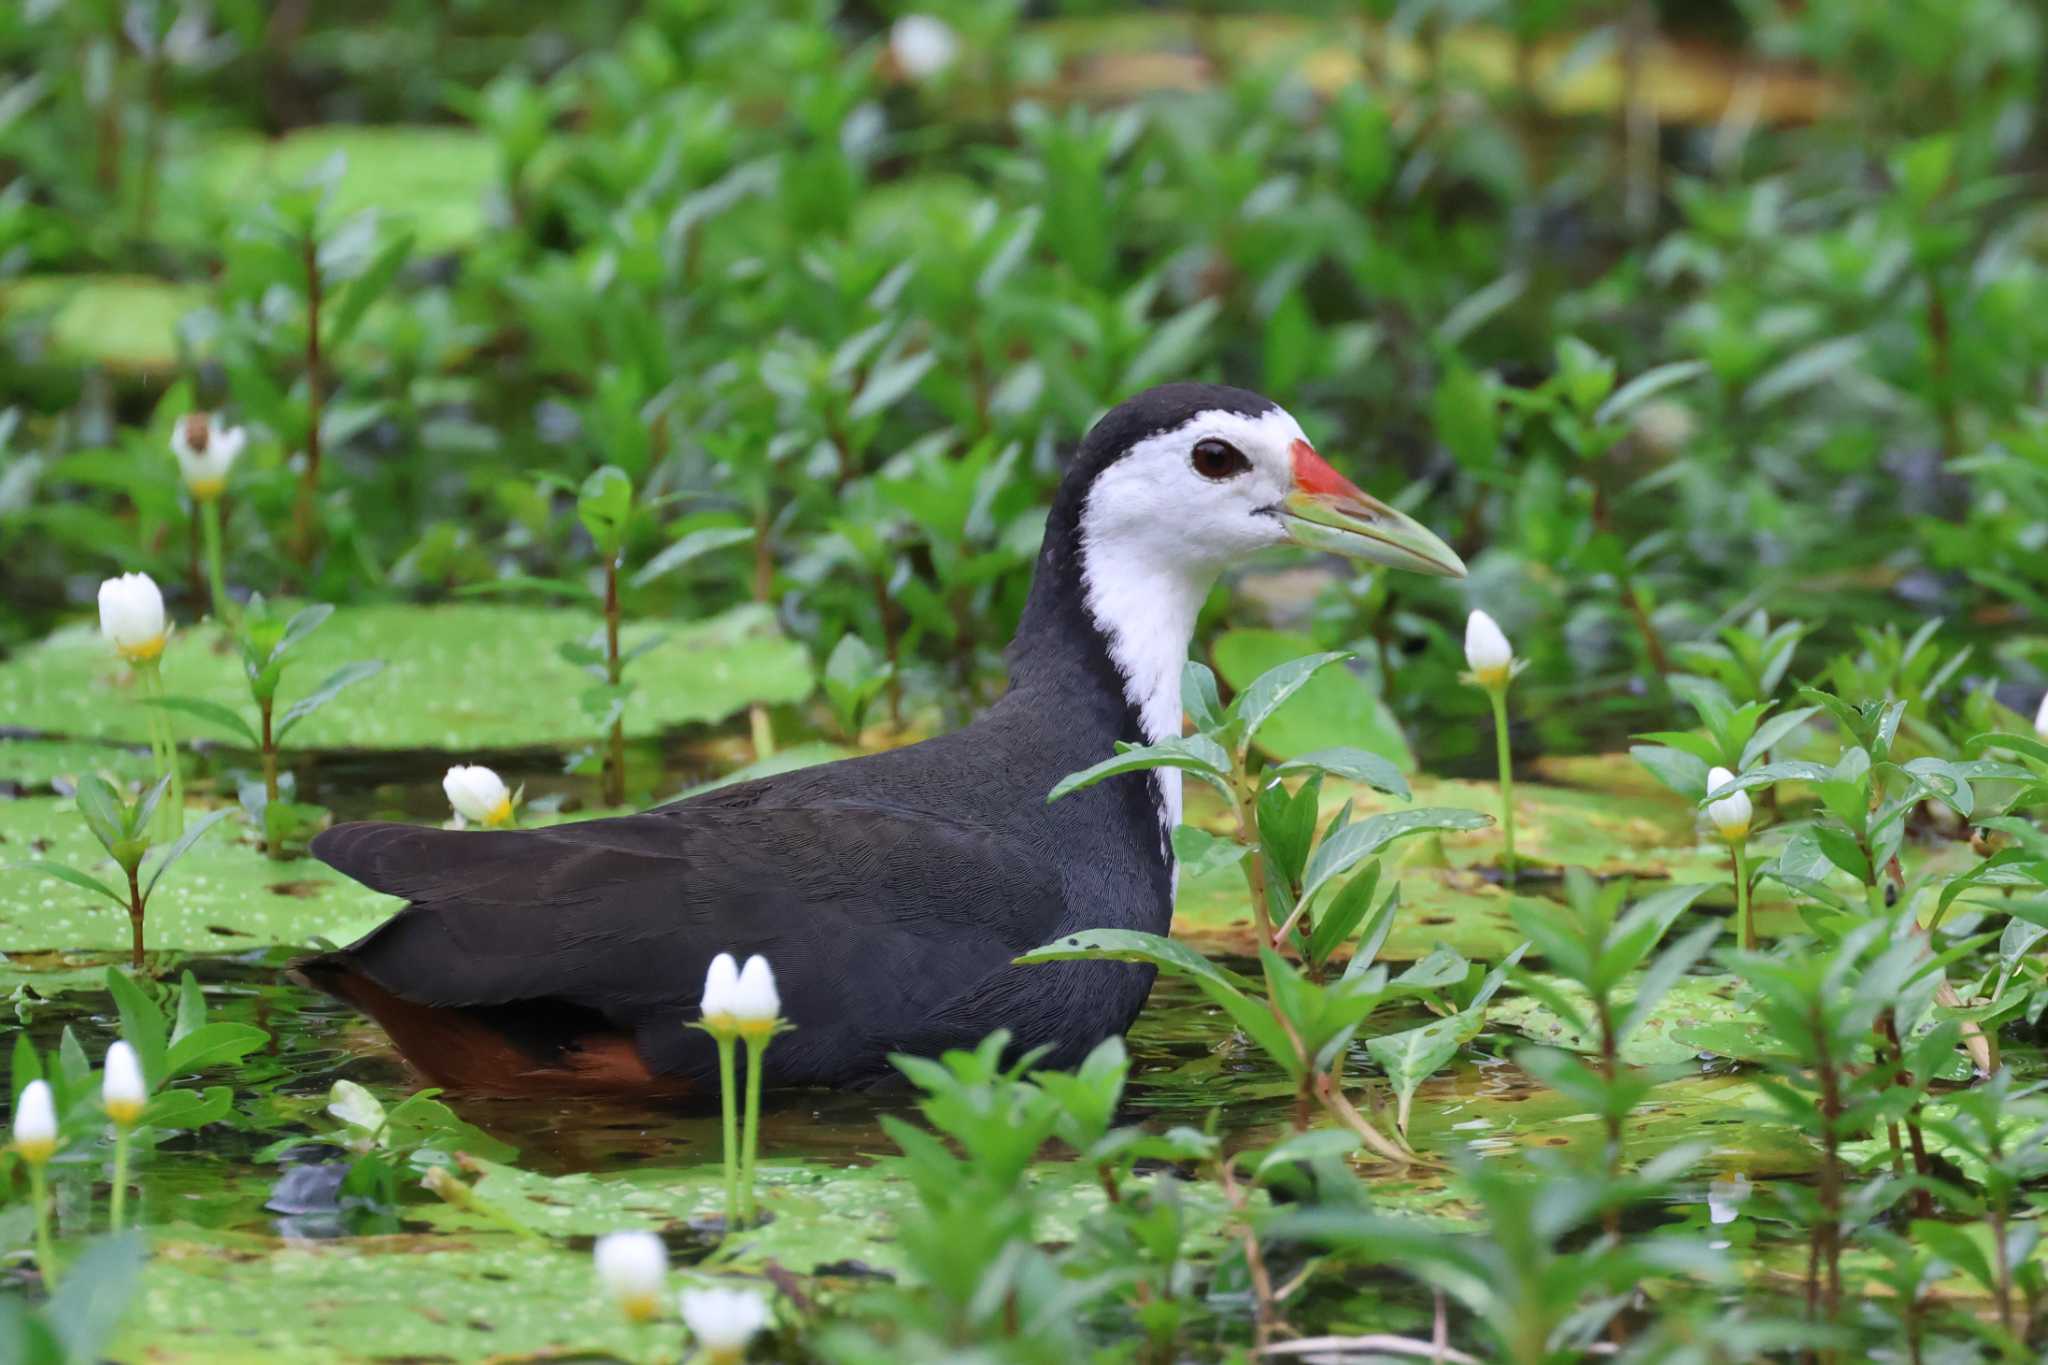 Photo of White-breasted Waterhen at Singapore Botanic Gardens by ぼぼぼ